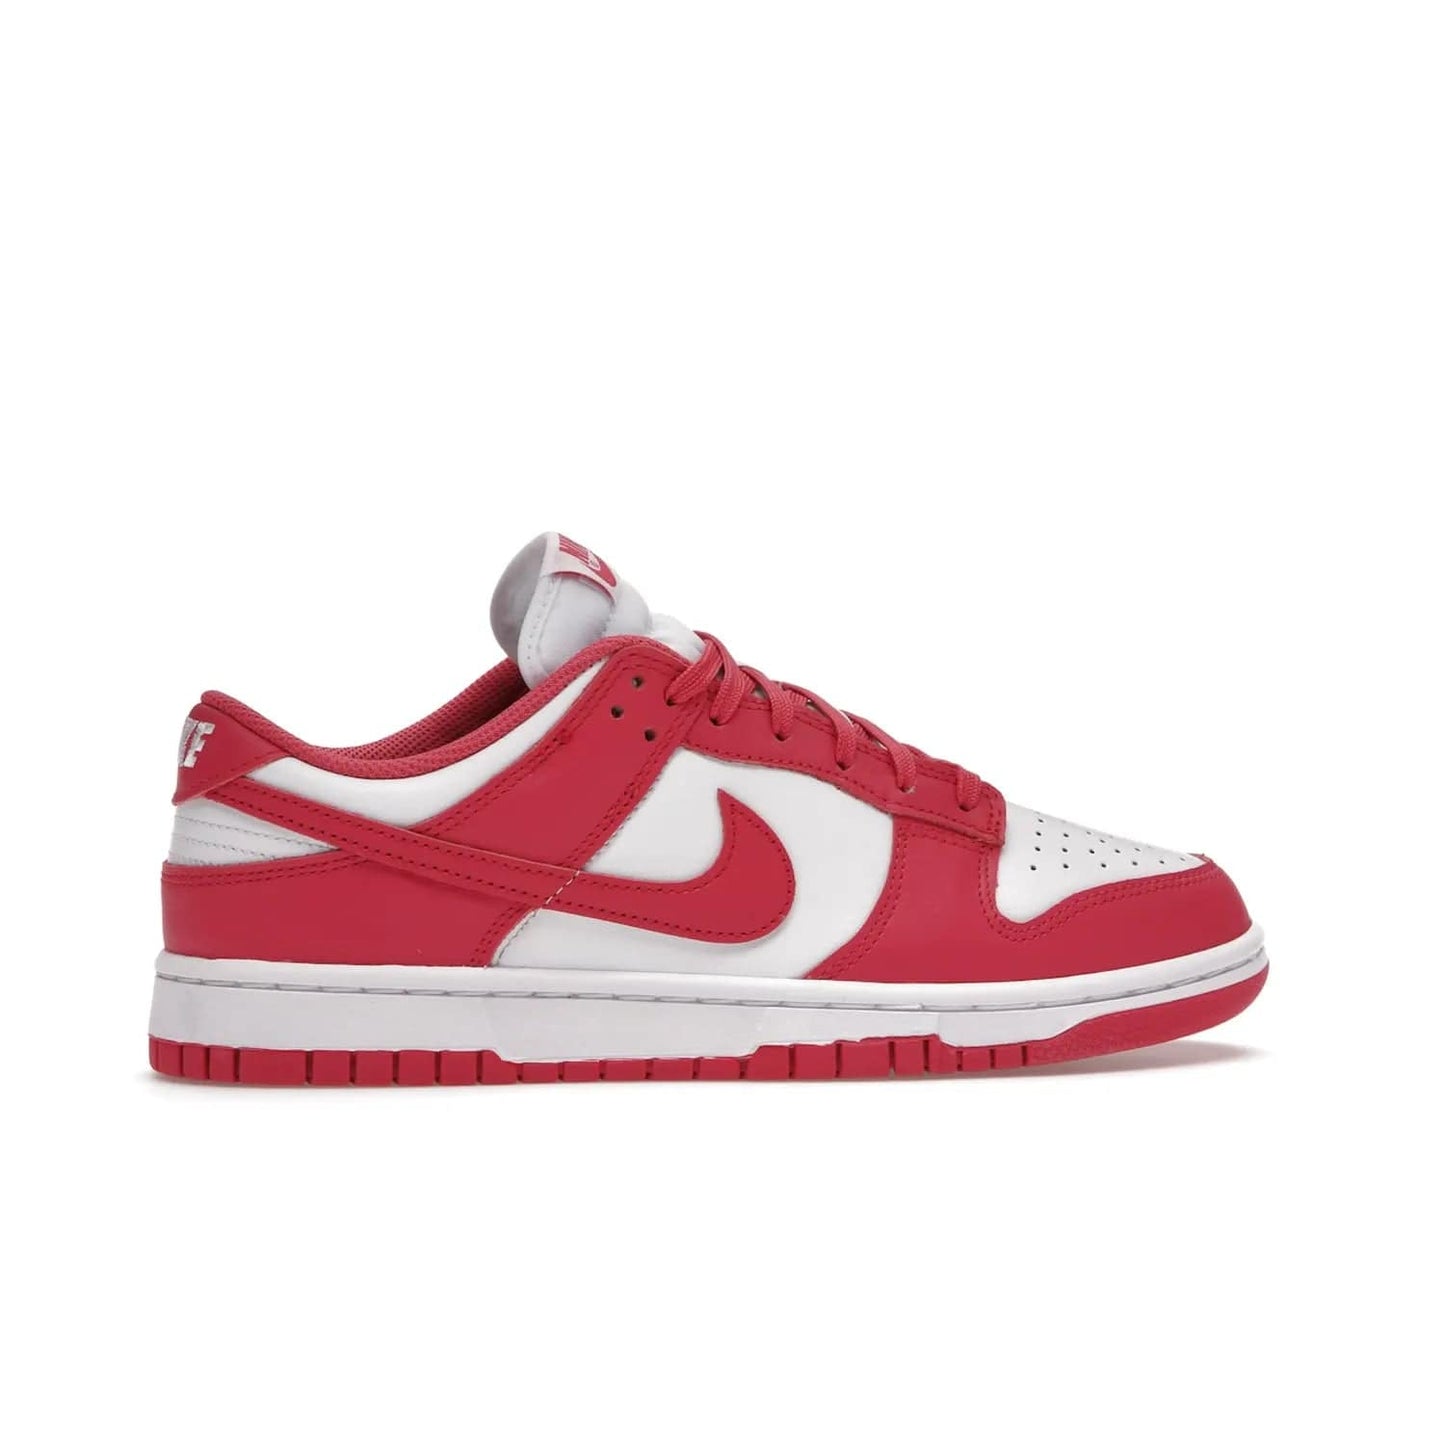 Nike Dunk Low Archeo Pink (Women's) - Image 36 - Only at www.BallersClubKickz.com - Introducing the stylish and comfortable Nike Dunk Low Archeo Pink (Women's). White/Archeo Pink colorway with white leather upper, pink overlays and Swooshes. Get yours now!